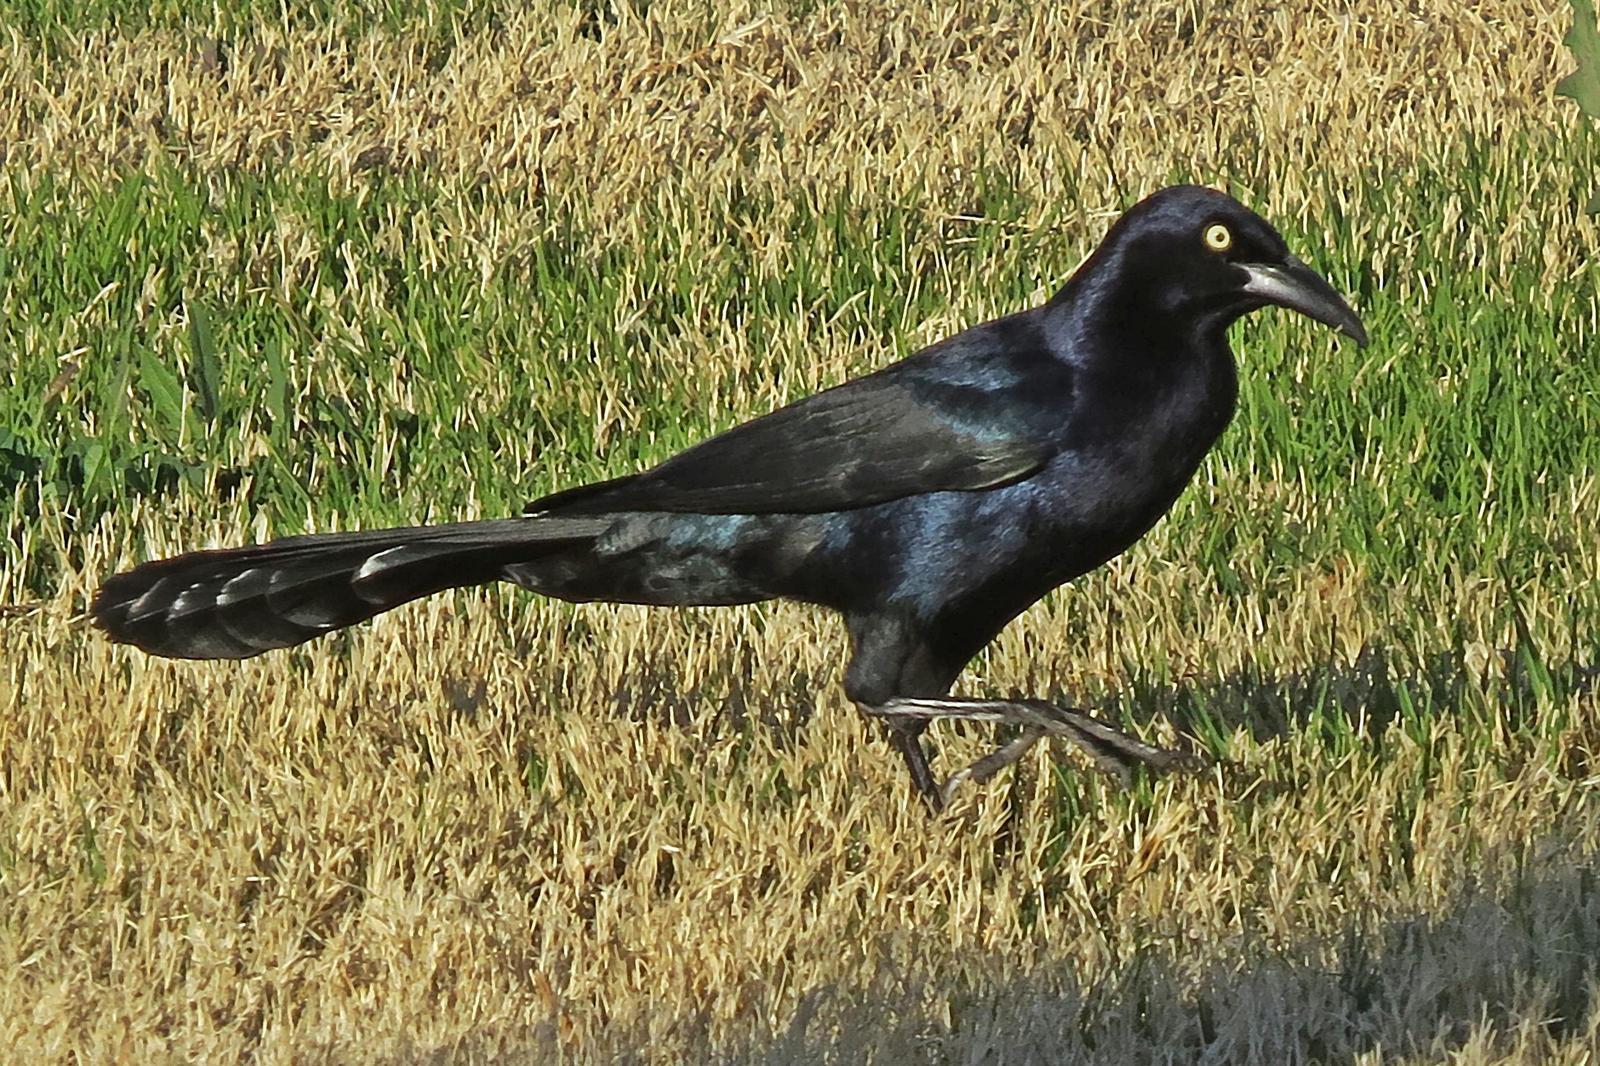 Great-tailed Grackle Photo by Bob Neugebauer